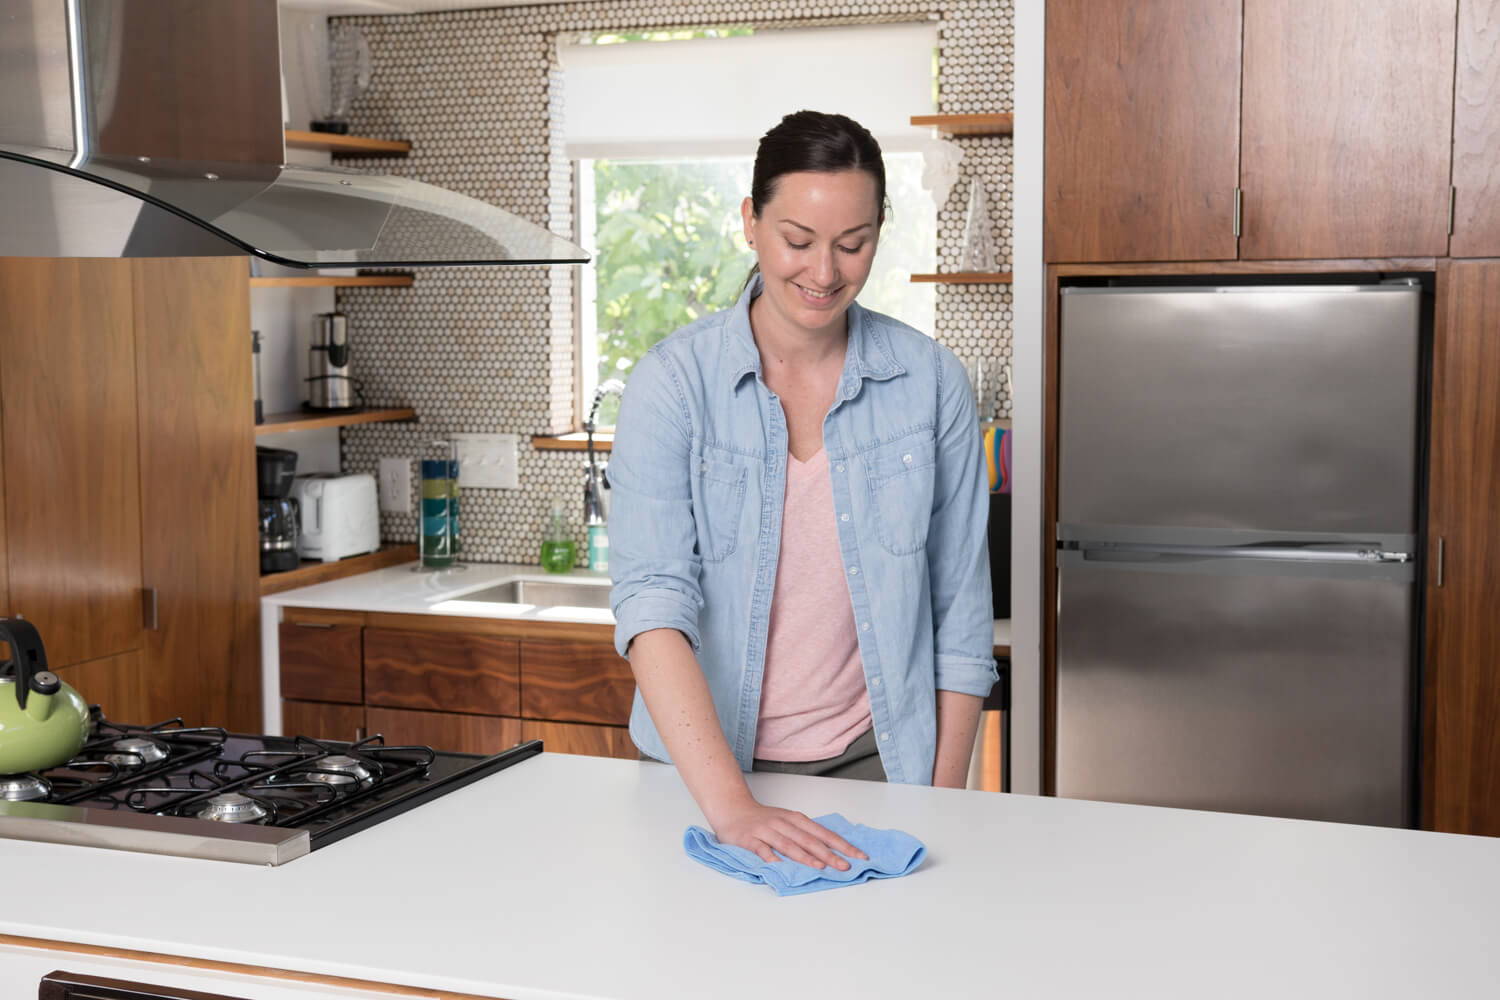 woman cleaning kitchen counter with microfiber towel